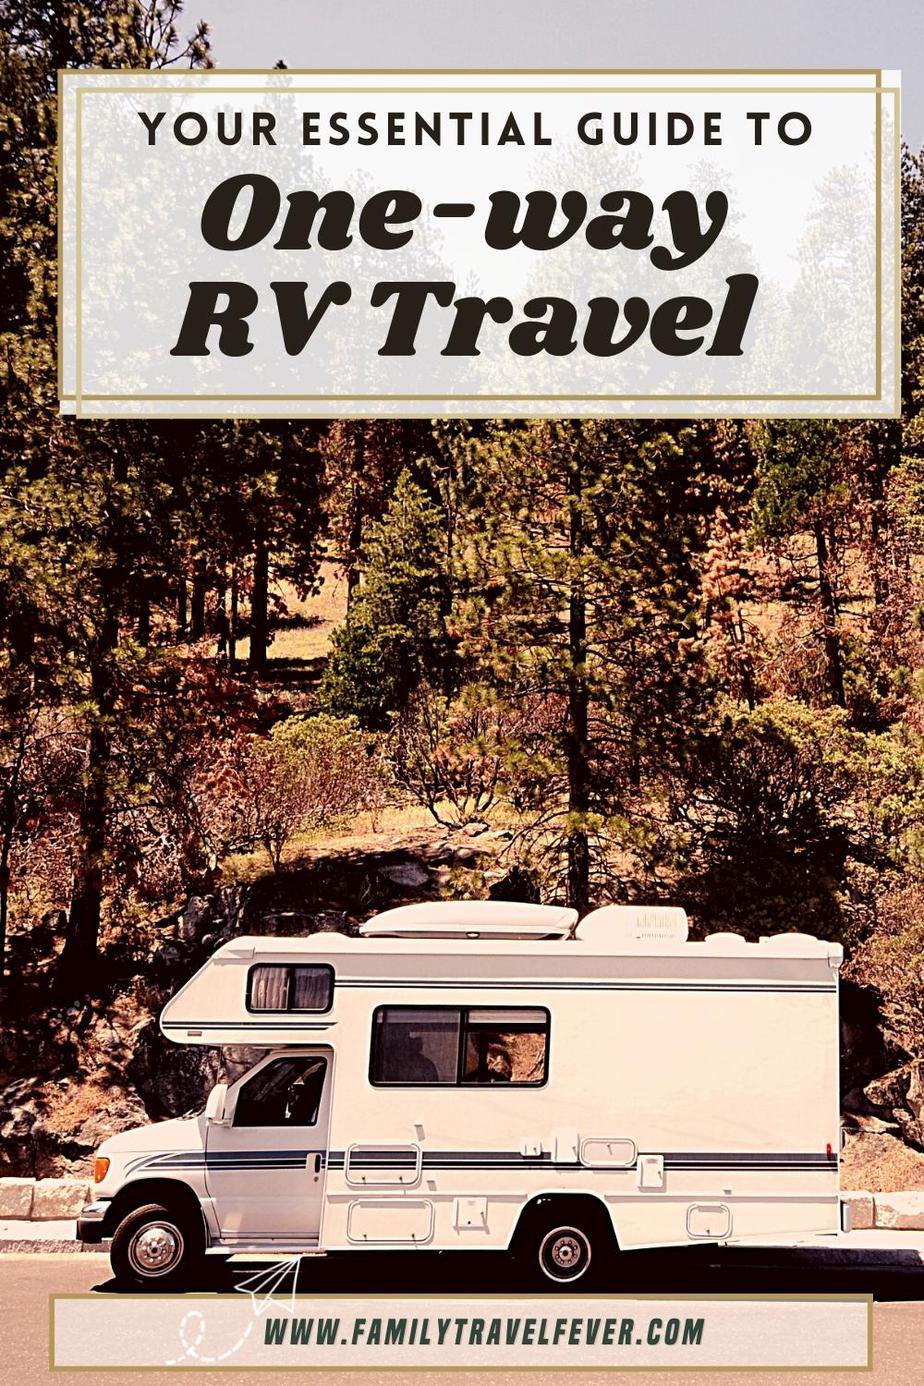 A class RV traveling on the road with trees in the background